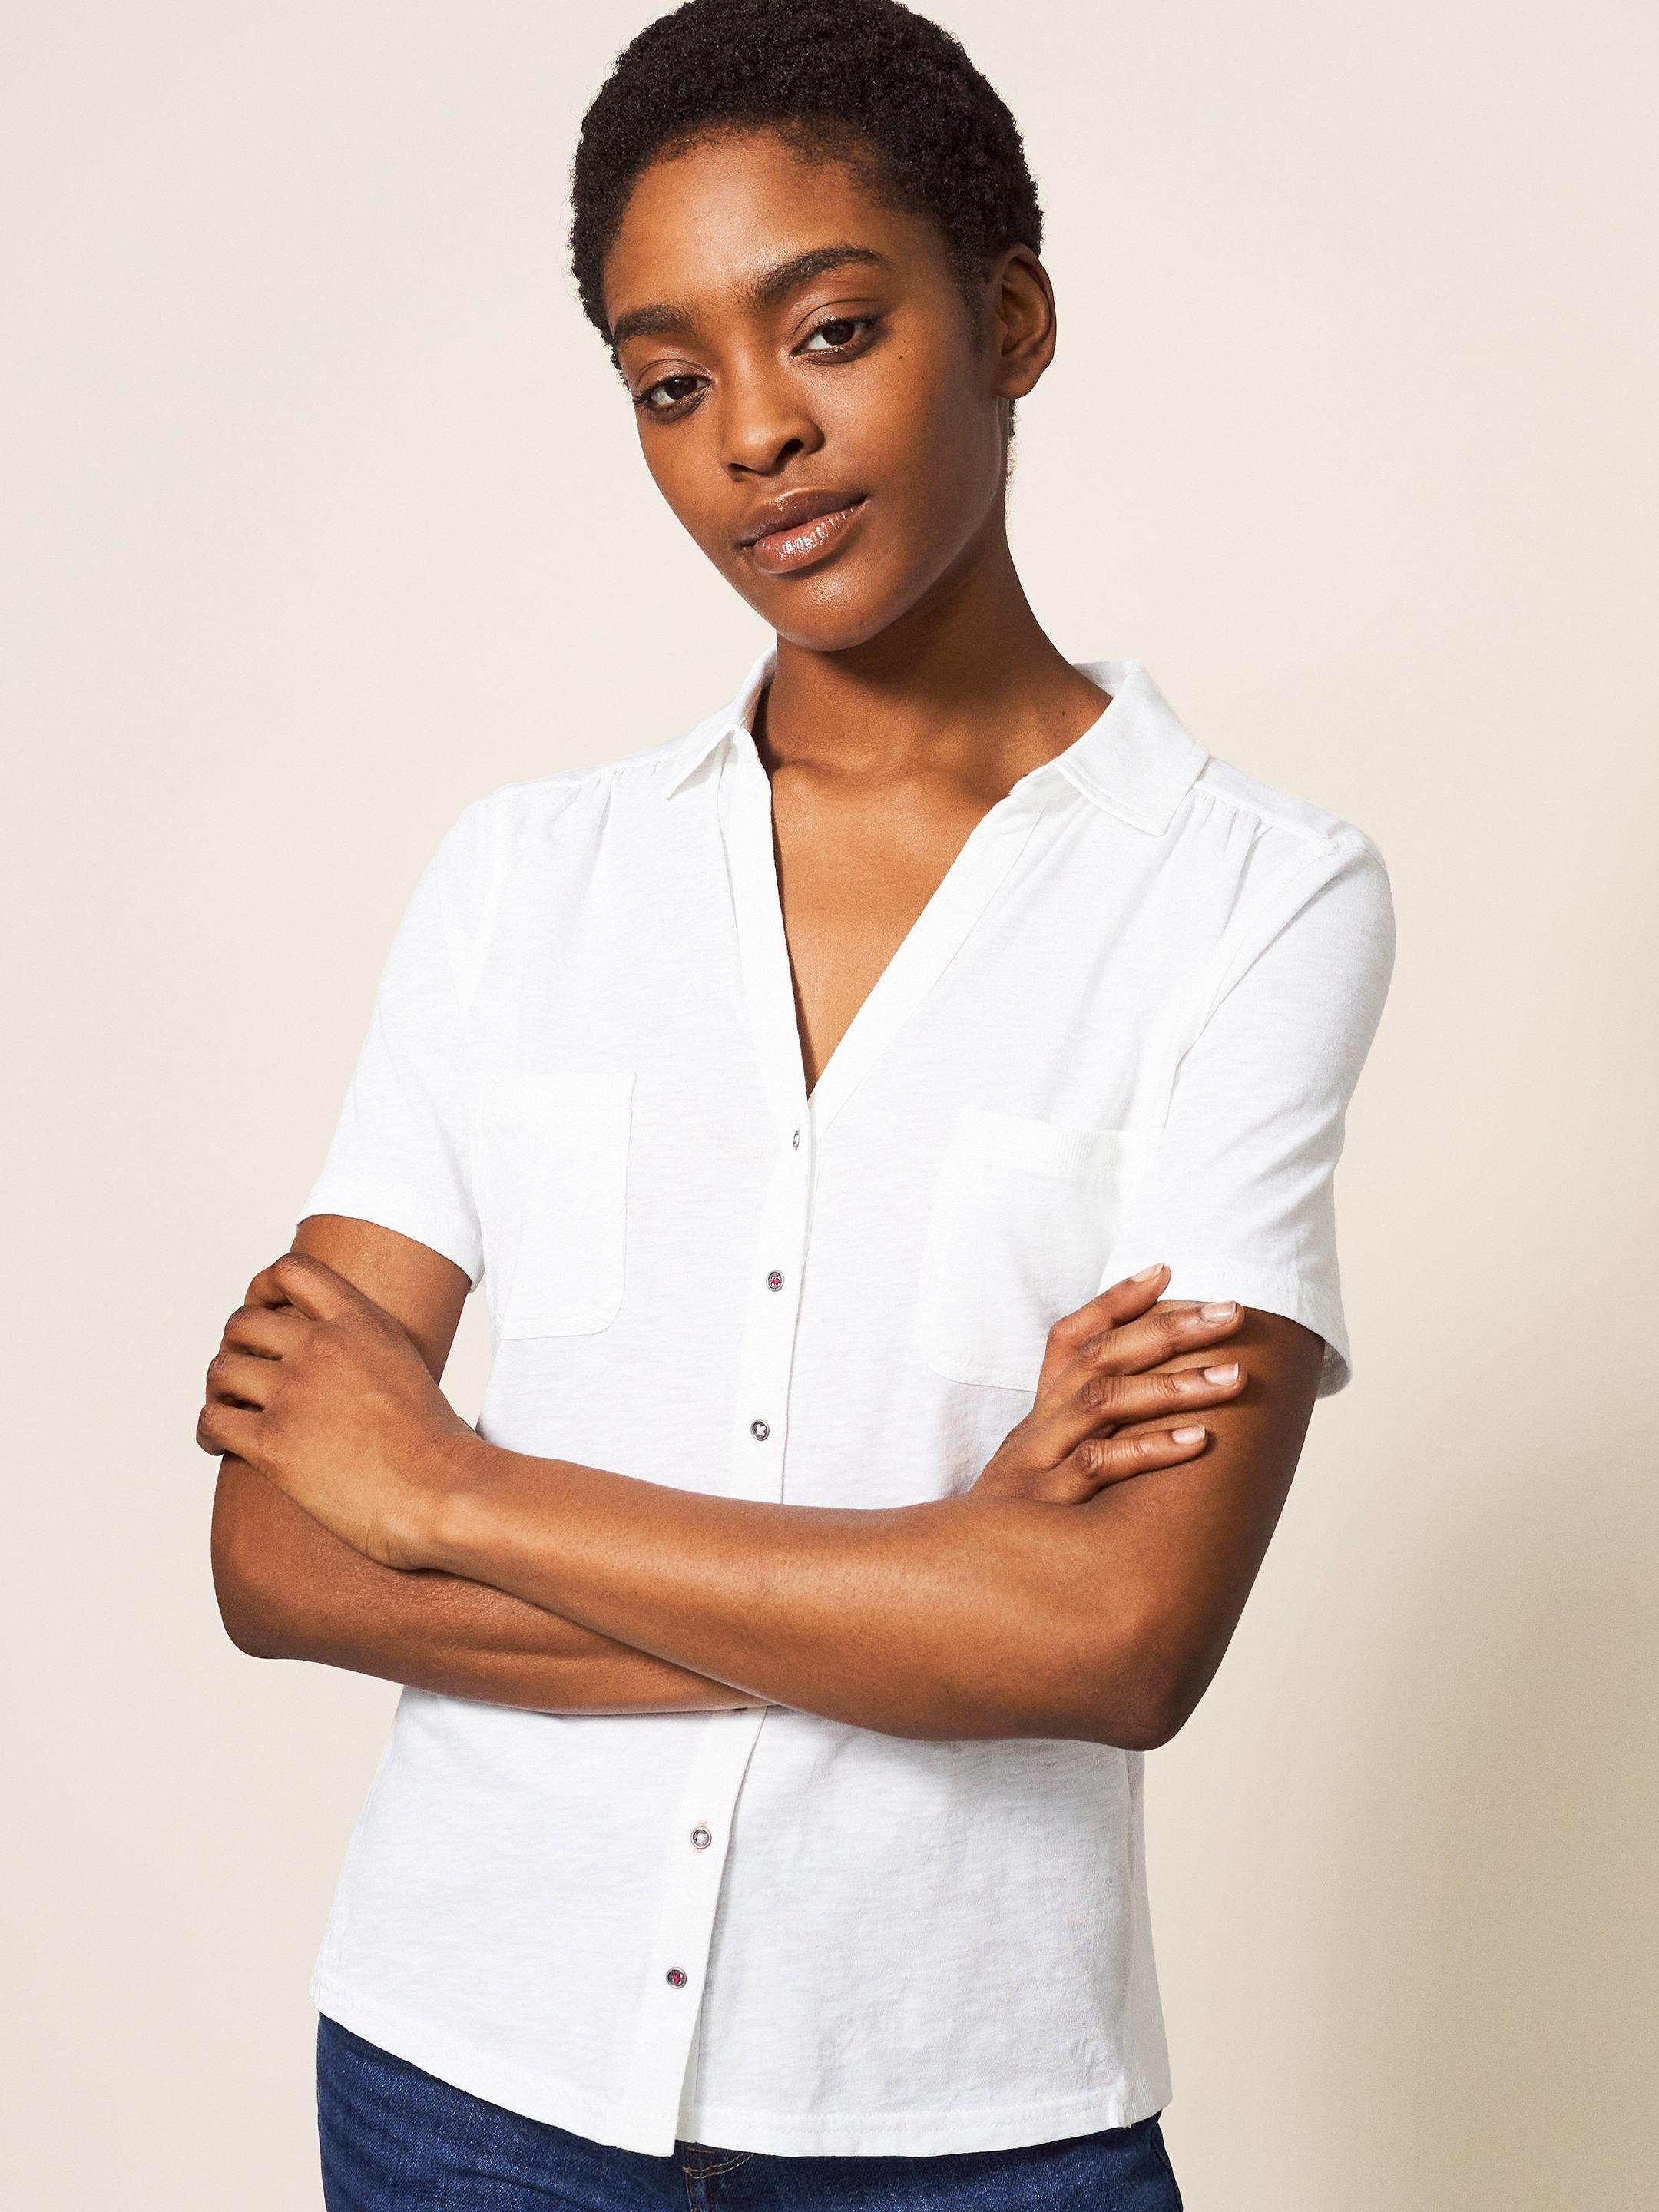 Women's White Shirts, White Blouses and Tunic Tops